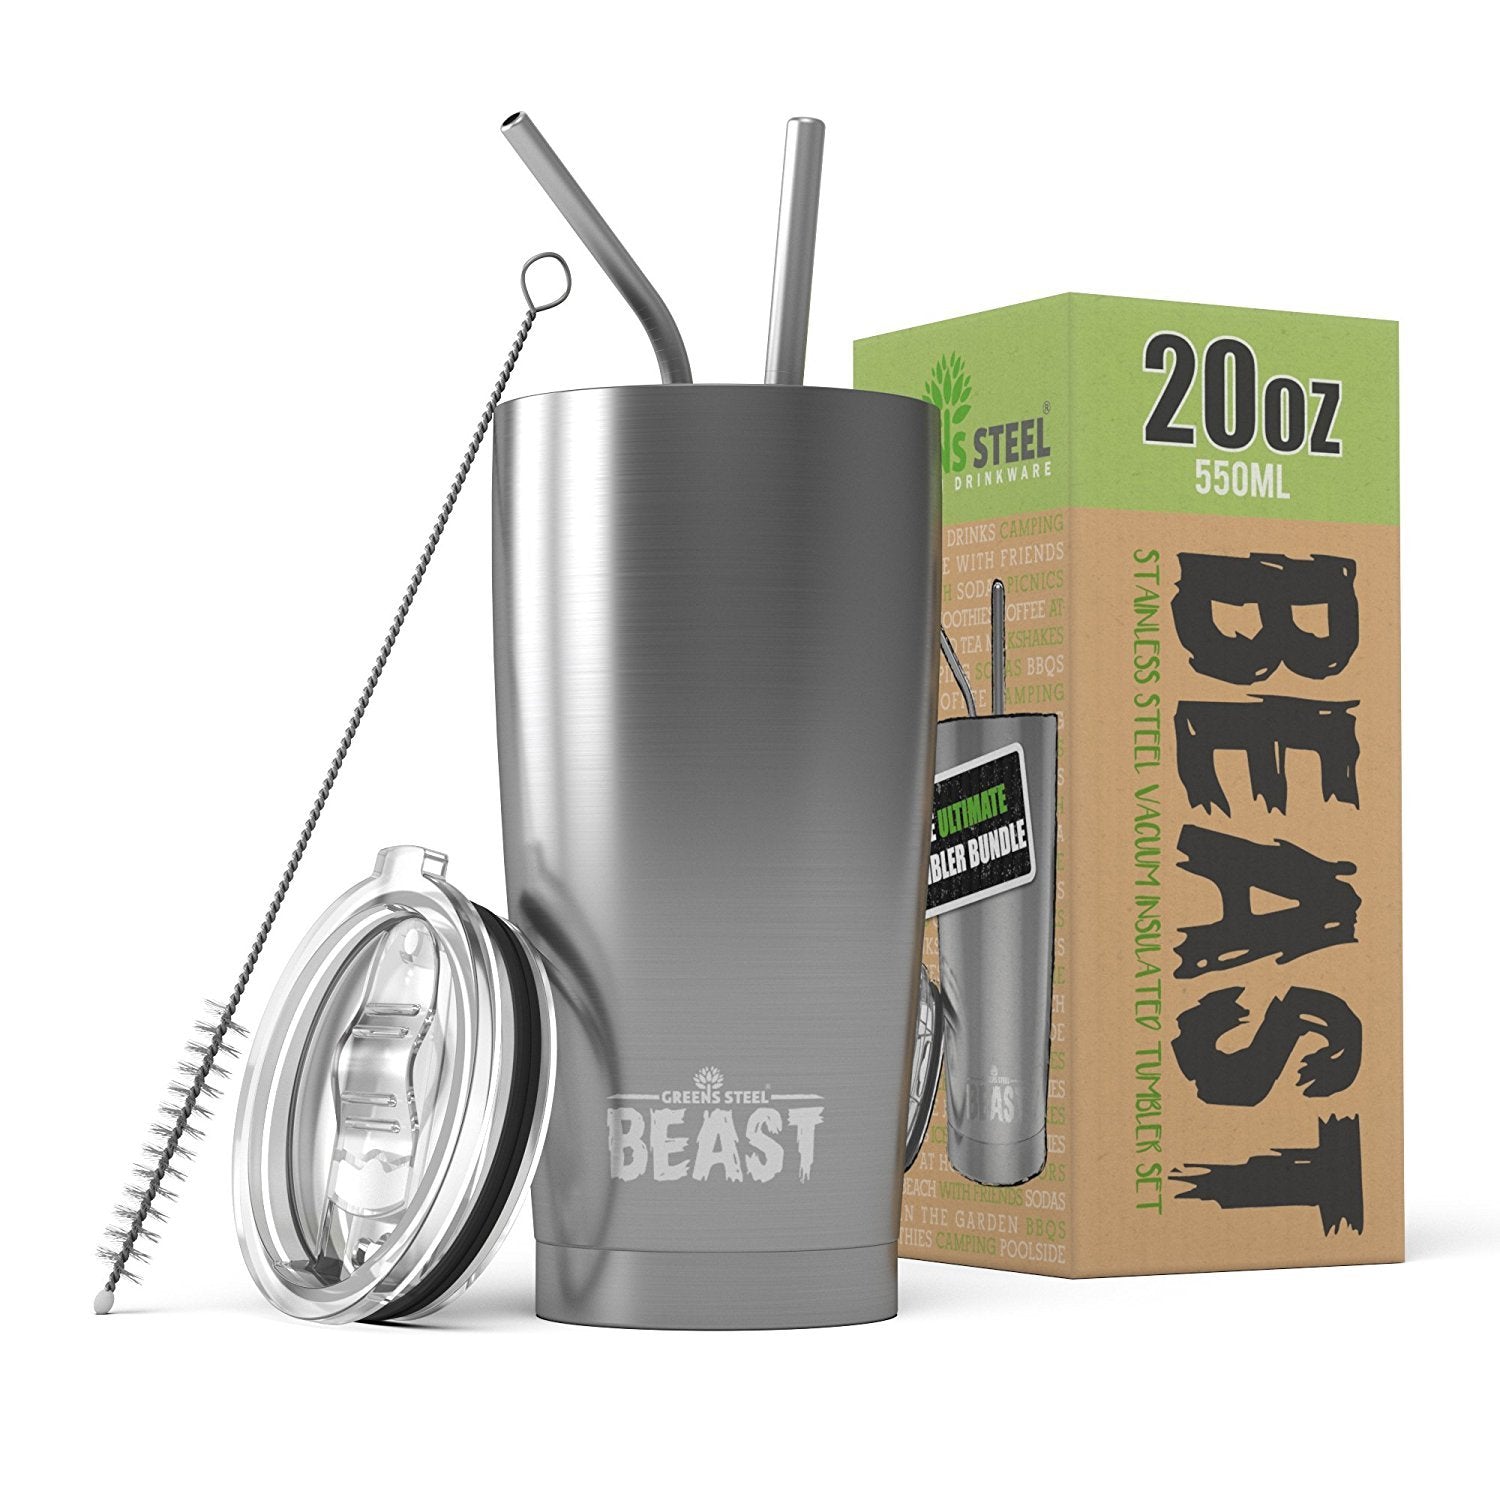 All colors back in stock 🎉 30oz Beast Tumbler - Greens Steel